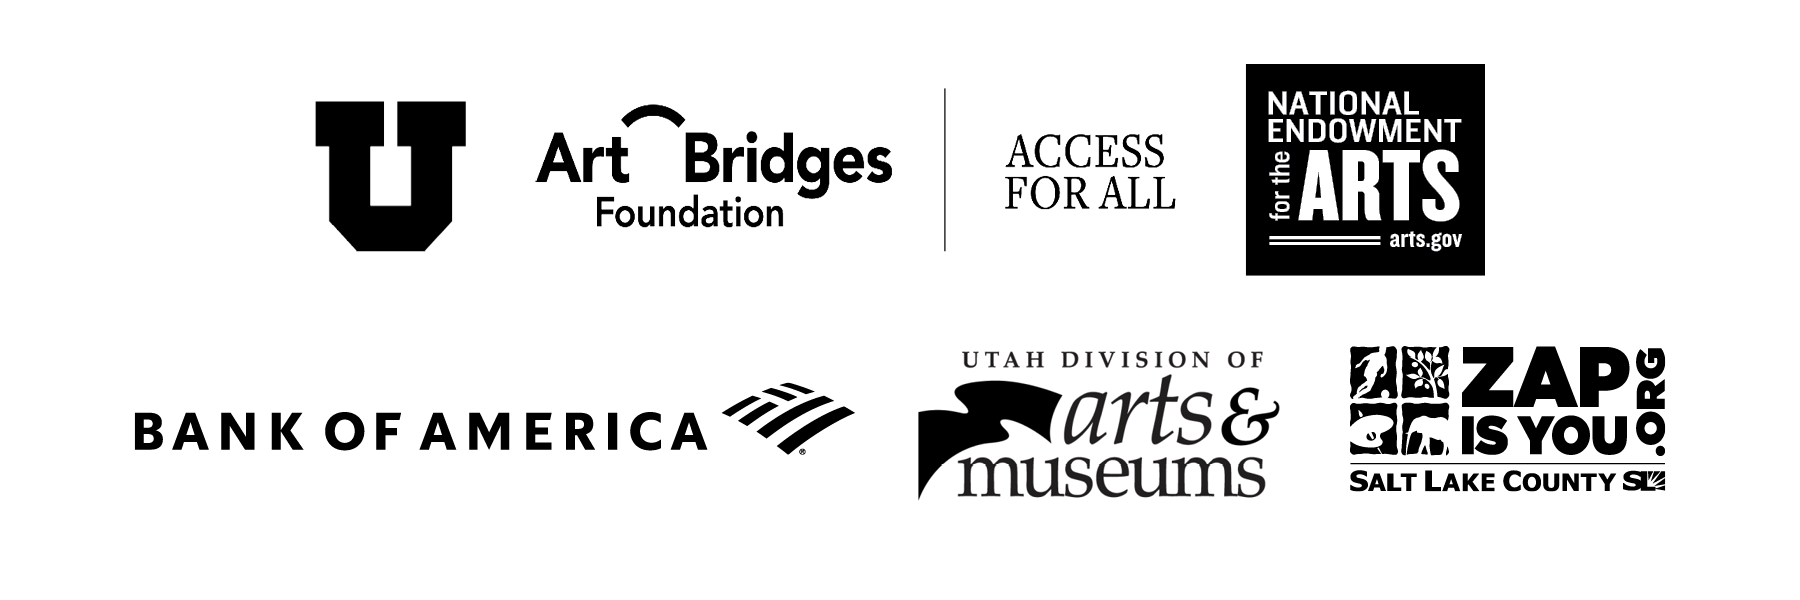 A collection of sponsor logos from the University of Utah, Art Bridges Foundation, Access for All, the National Endowment for the Arts, Bank of America, the Utah Division of Arts & Museums, and ZAP